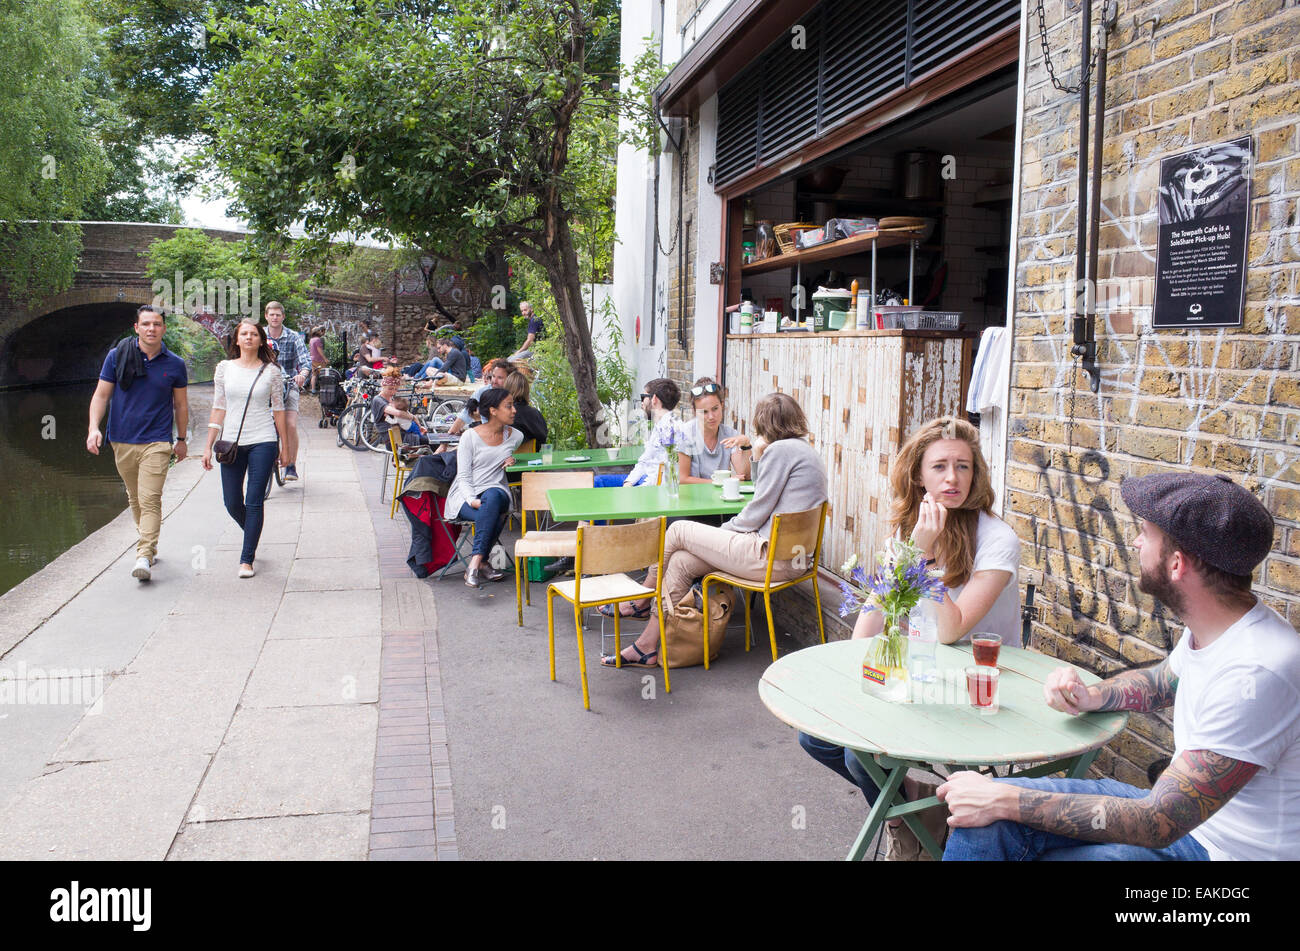 The Towpath Cafe on the Regent's Canal, Shoreditch, Hackney, London, Großbritannien Stockfoto